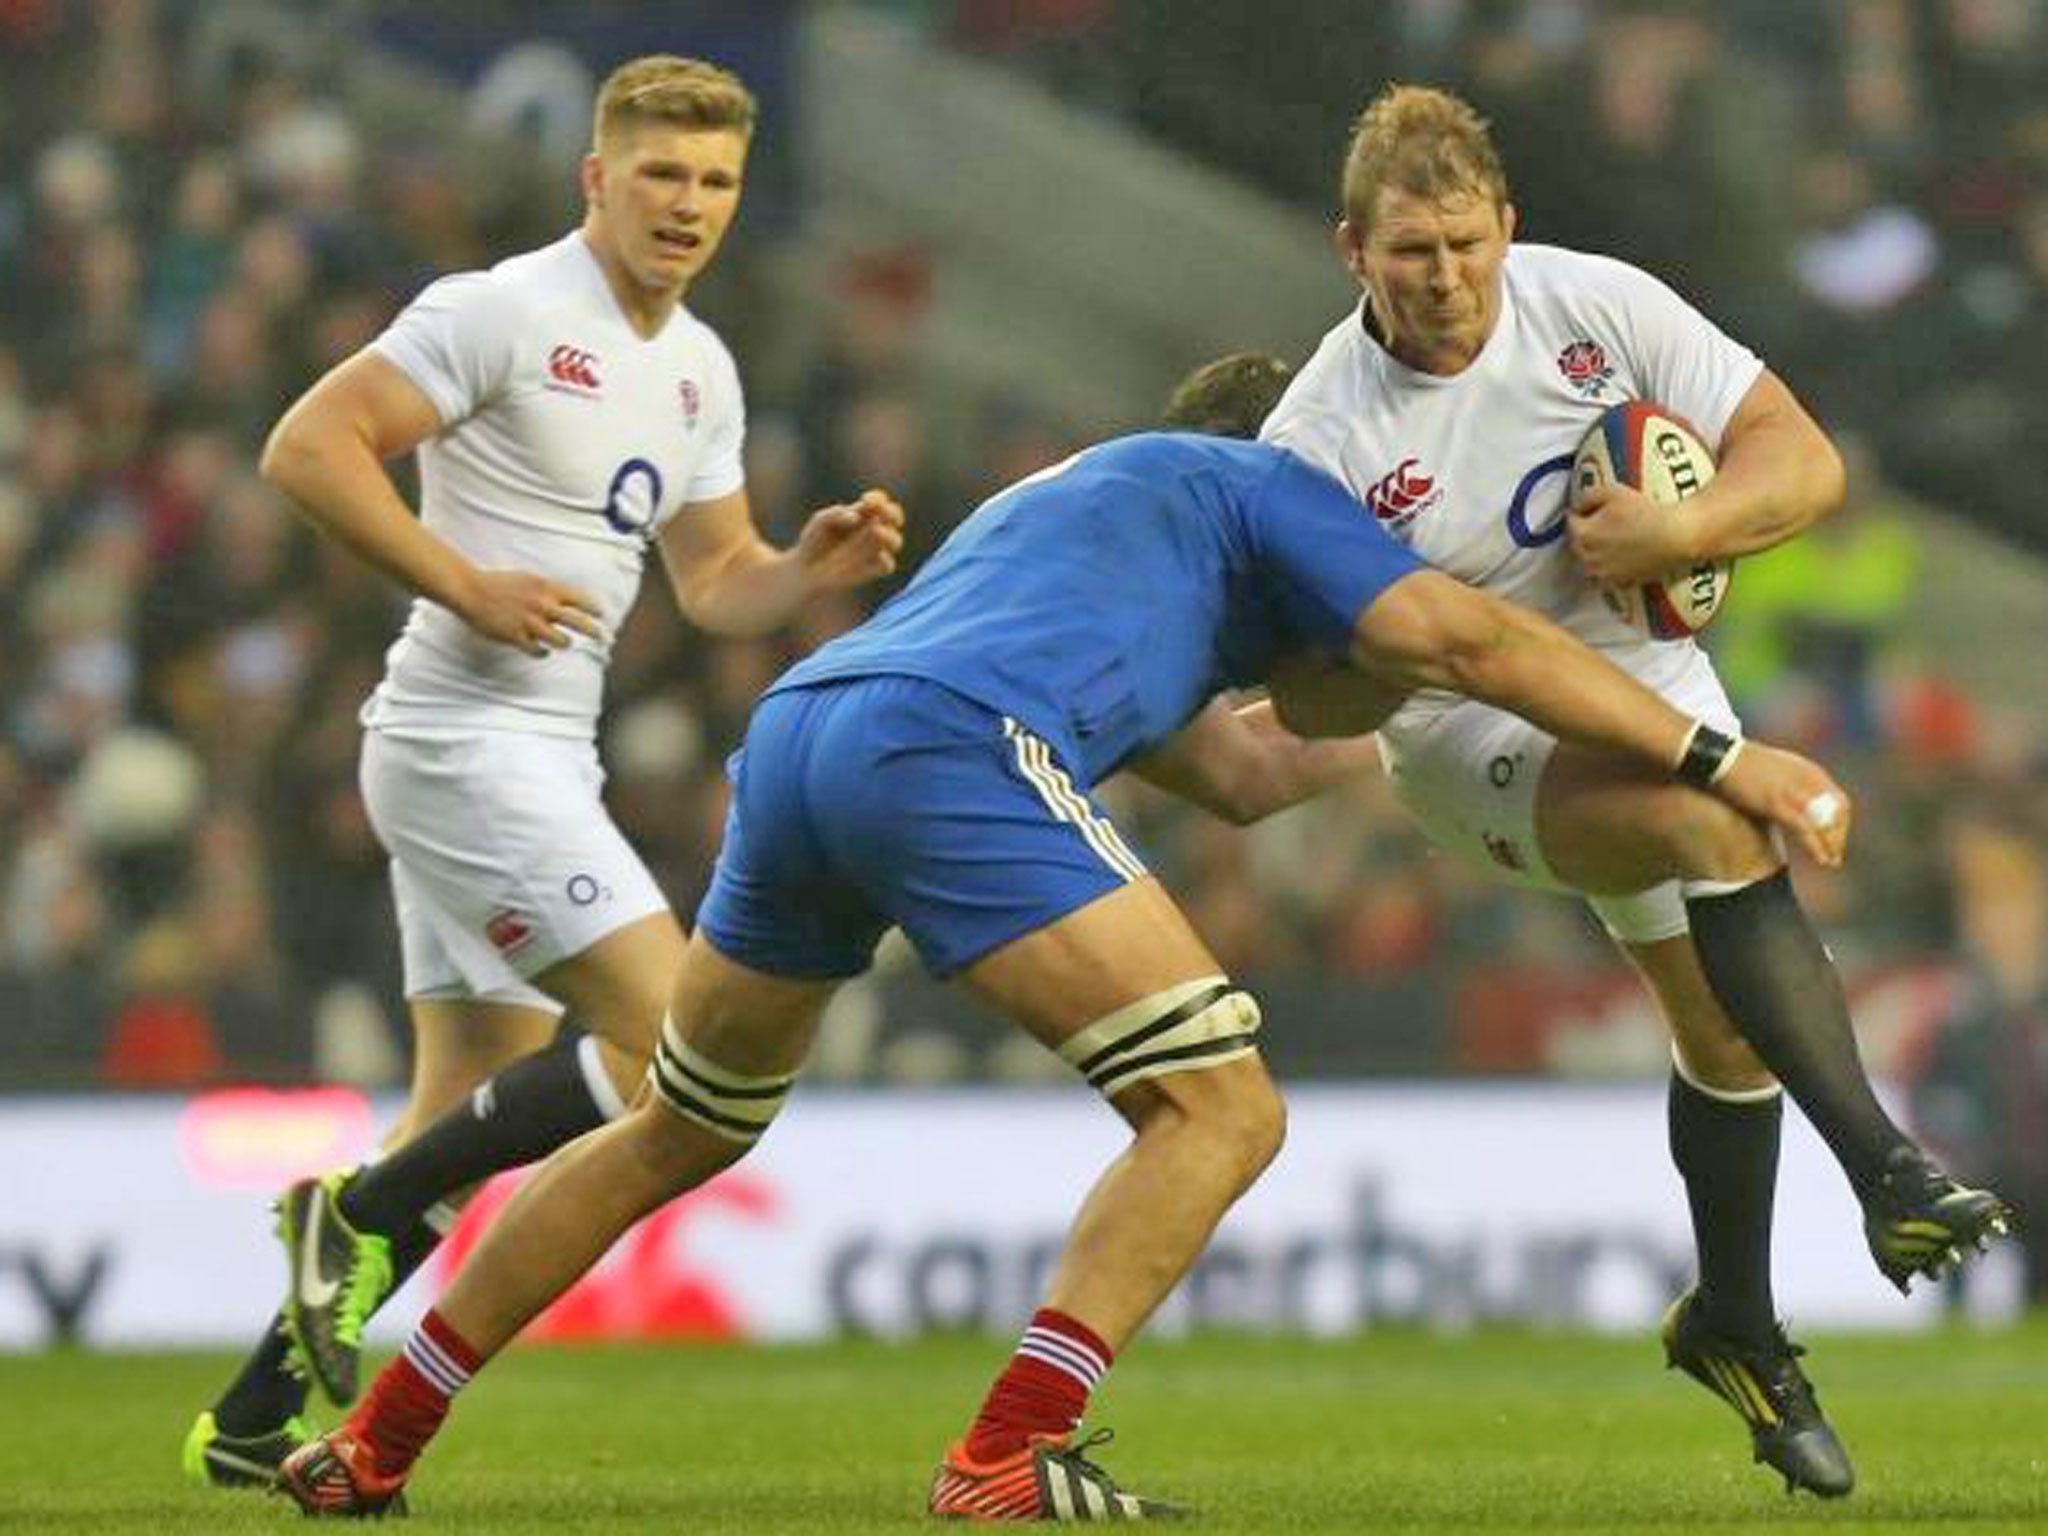 Dylan Hartley, right, last started for England exactly eight months ago, against South Africa in Port Elizabeth. Now he knows that, for all his experience, he has a genuine challenger for the No2 shirt in Tom Youngs and he needed to grasp his chance here